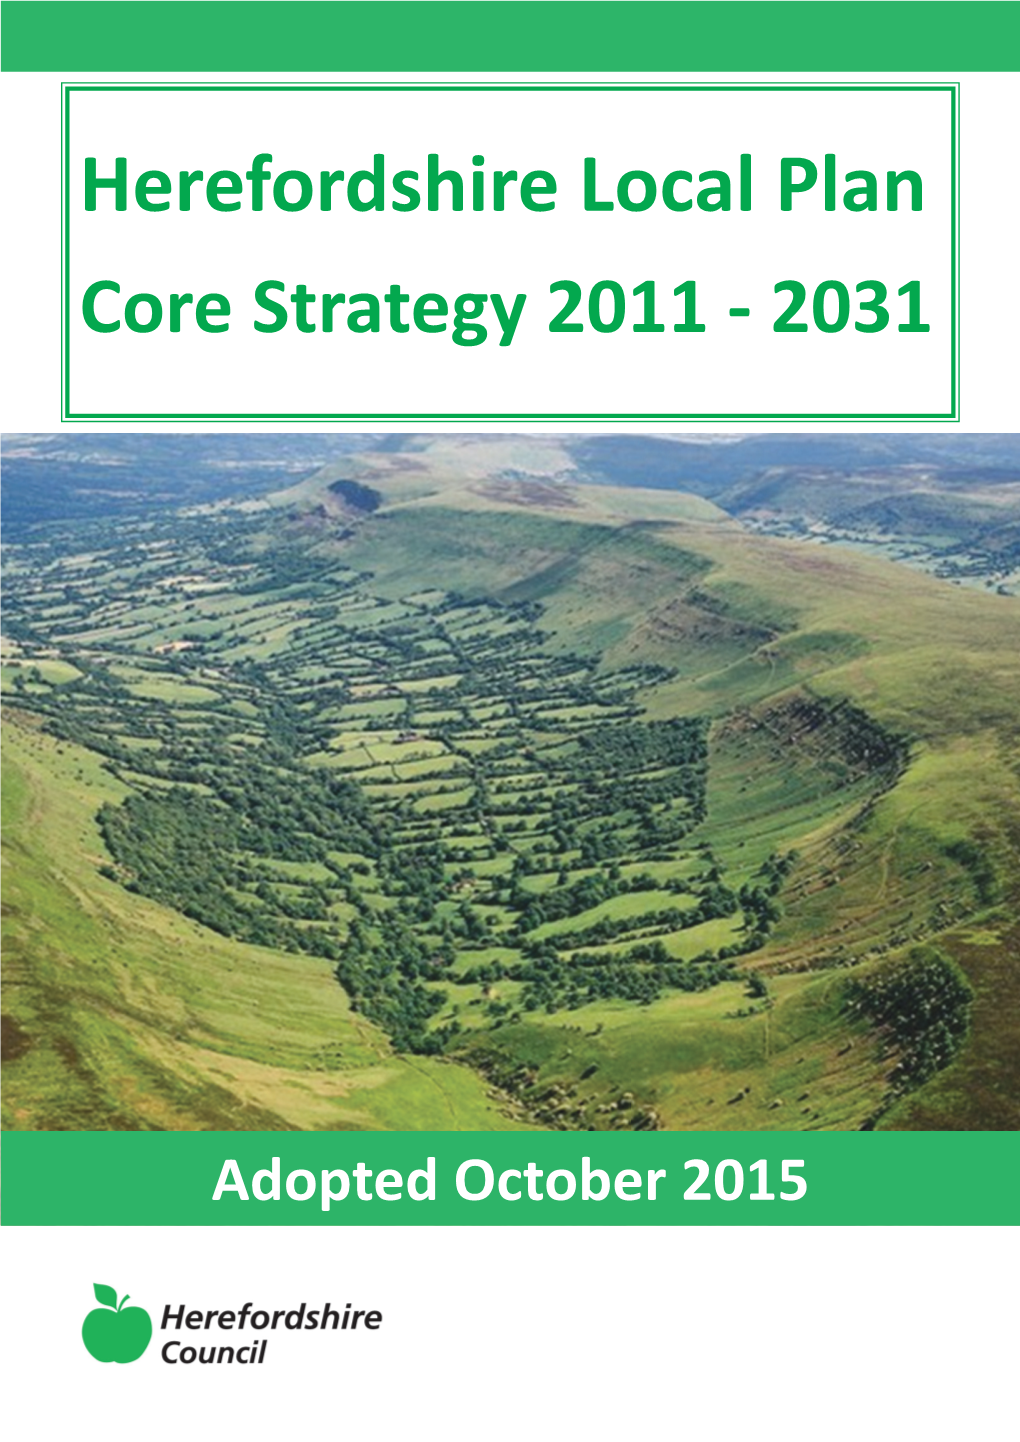 Herefordshire Local Plan Core Strategy 2011-2031 Please Note: the Appendices to the Herefordshire Local Plan - Core Strategy Are Contained Within a Separate Document